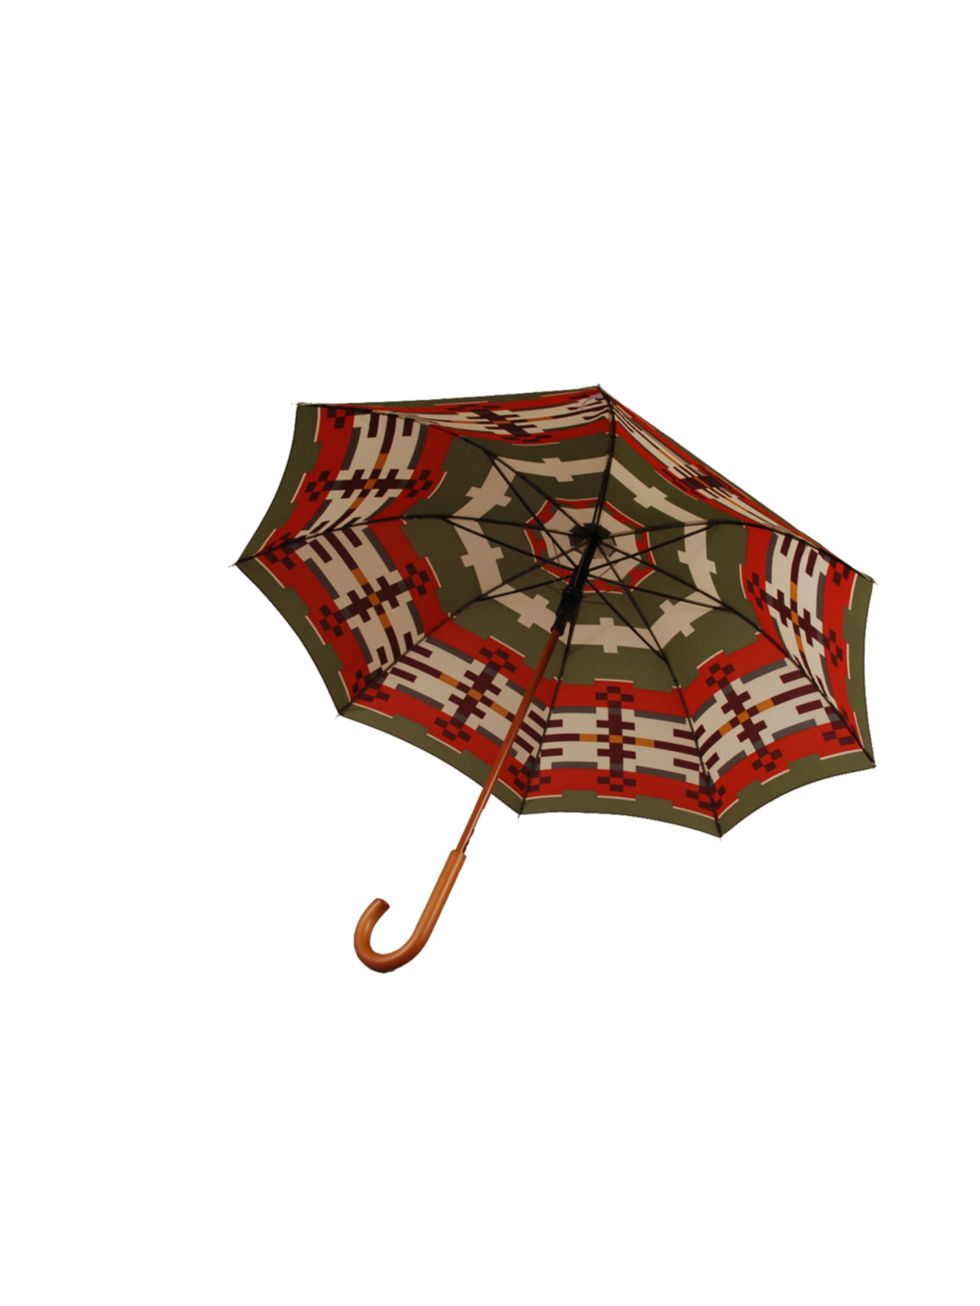 <p>THE UMBRELLA</p><p>Pendleton printed umbrella, £98, at <a href="http://goodhoodstore.com/?page=51&amp;id=4423&amp;type=womens">Goodhood</a></p>